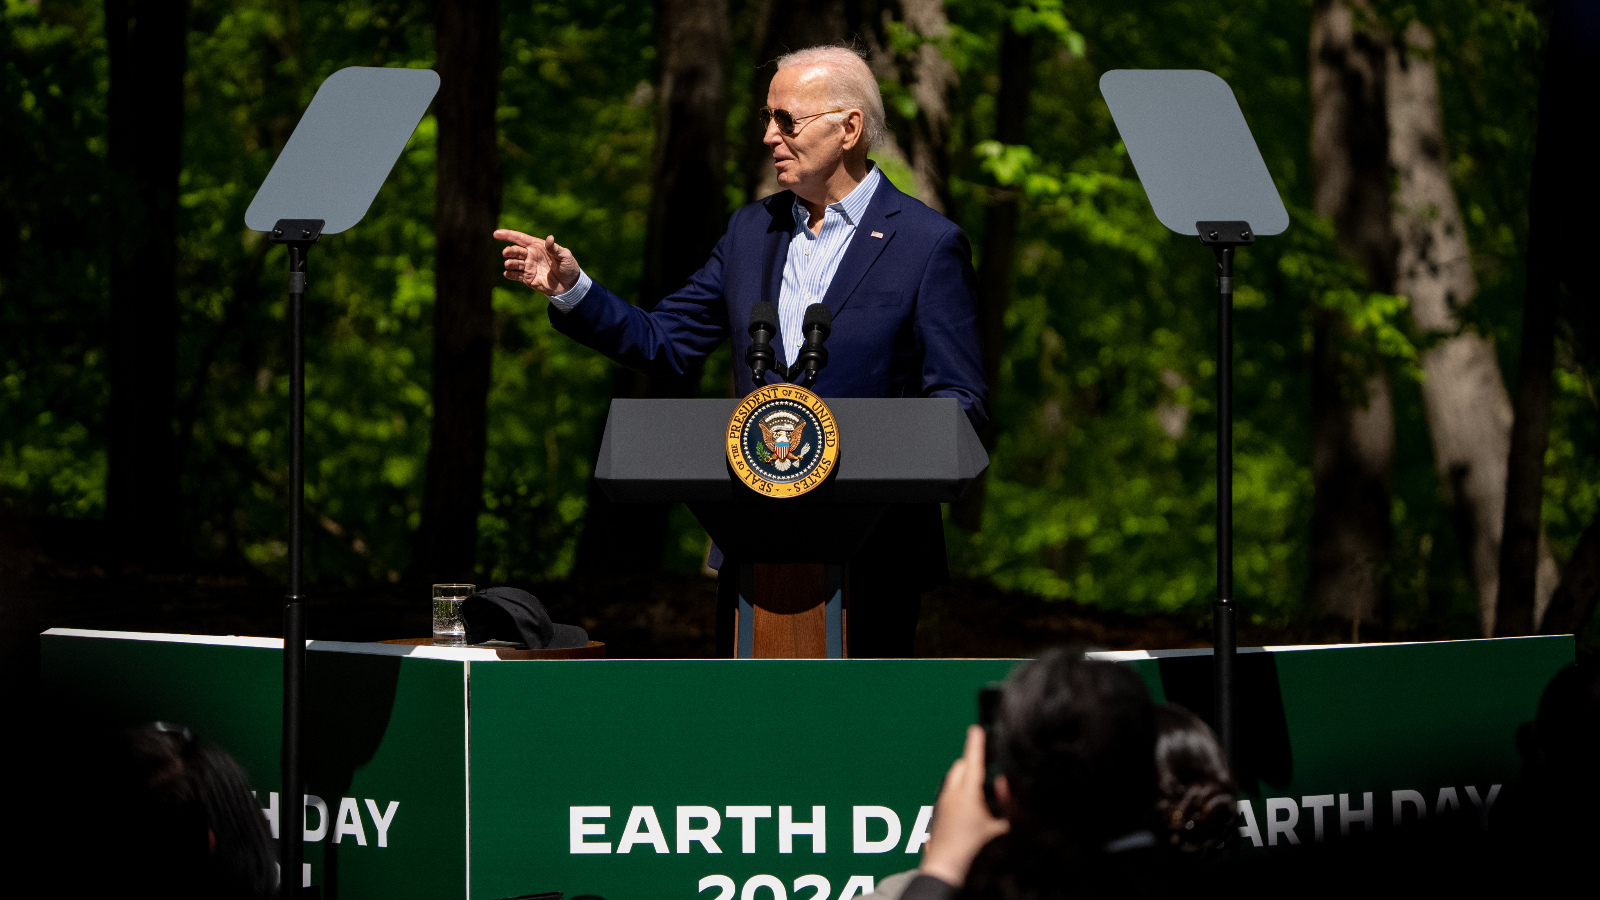 Biden wears sunglasses at a podium marked Earth Day 2024